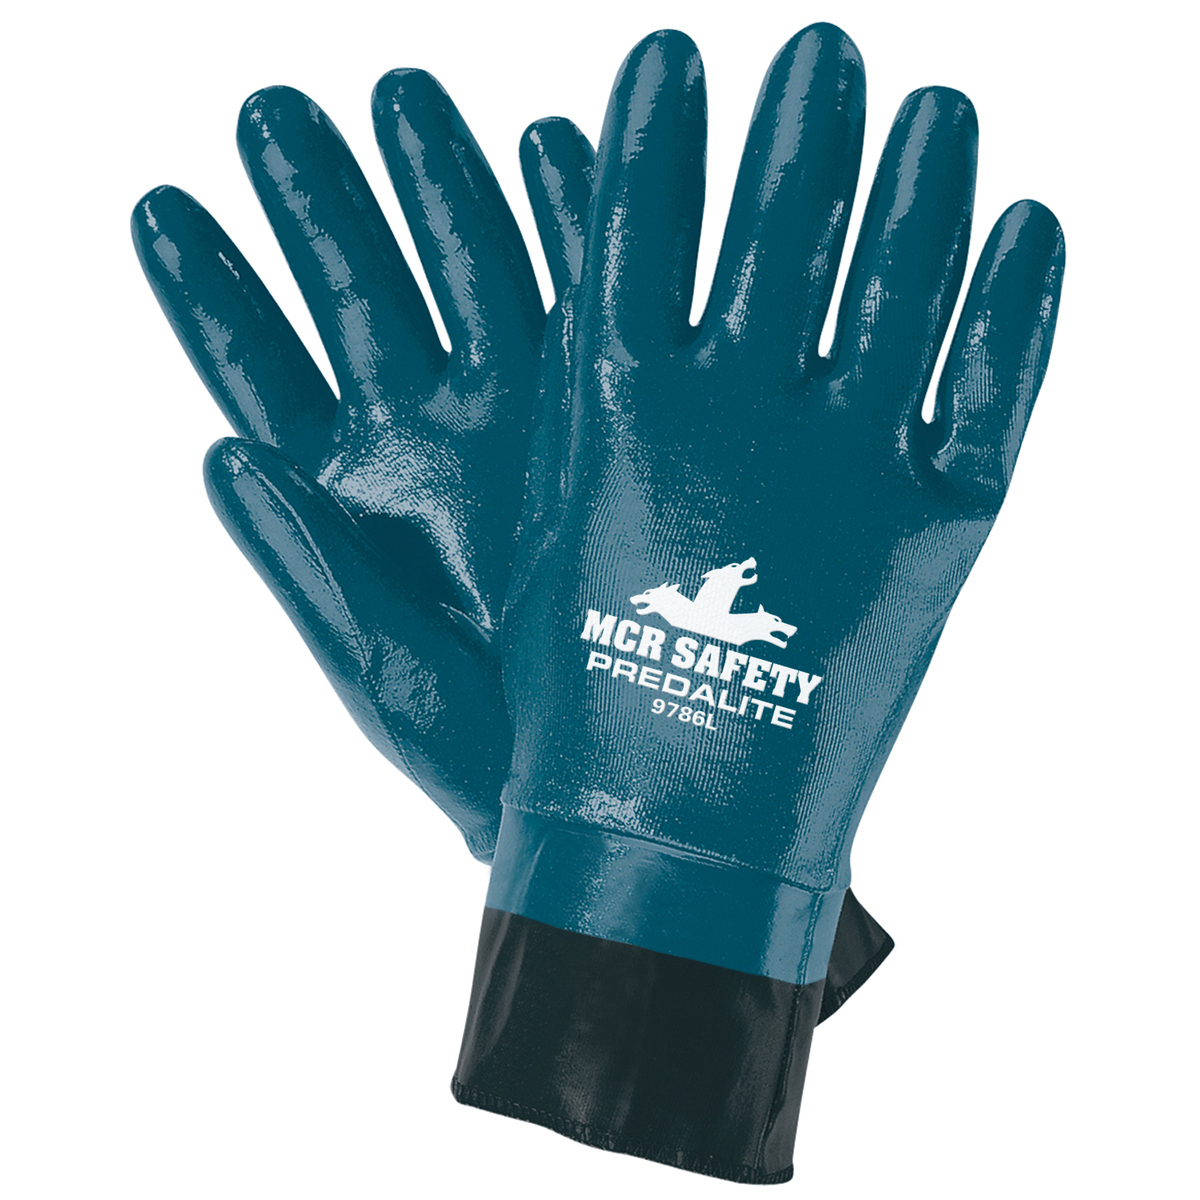 MCR Safety® X-Large Predalite® Blue Light Nitrile Full Dip Coating Work Gloves With Natural Interlock Liner And PVC Safety Cuff